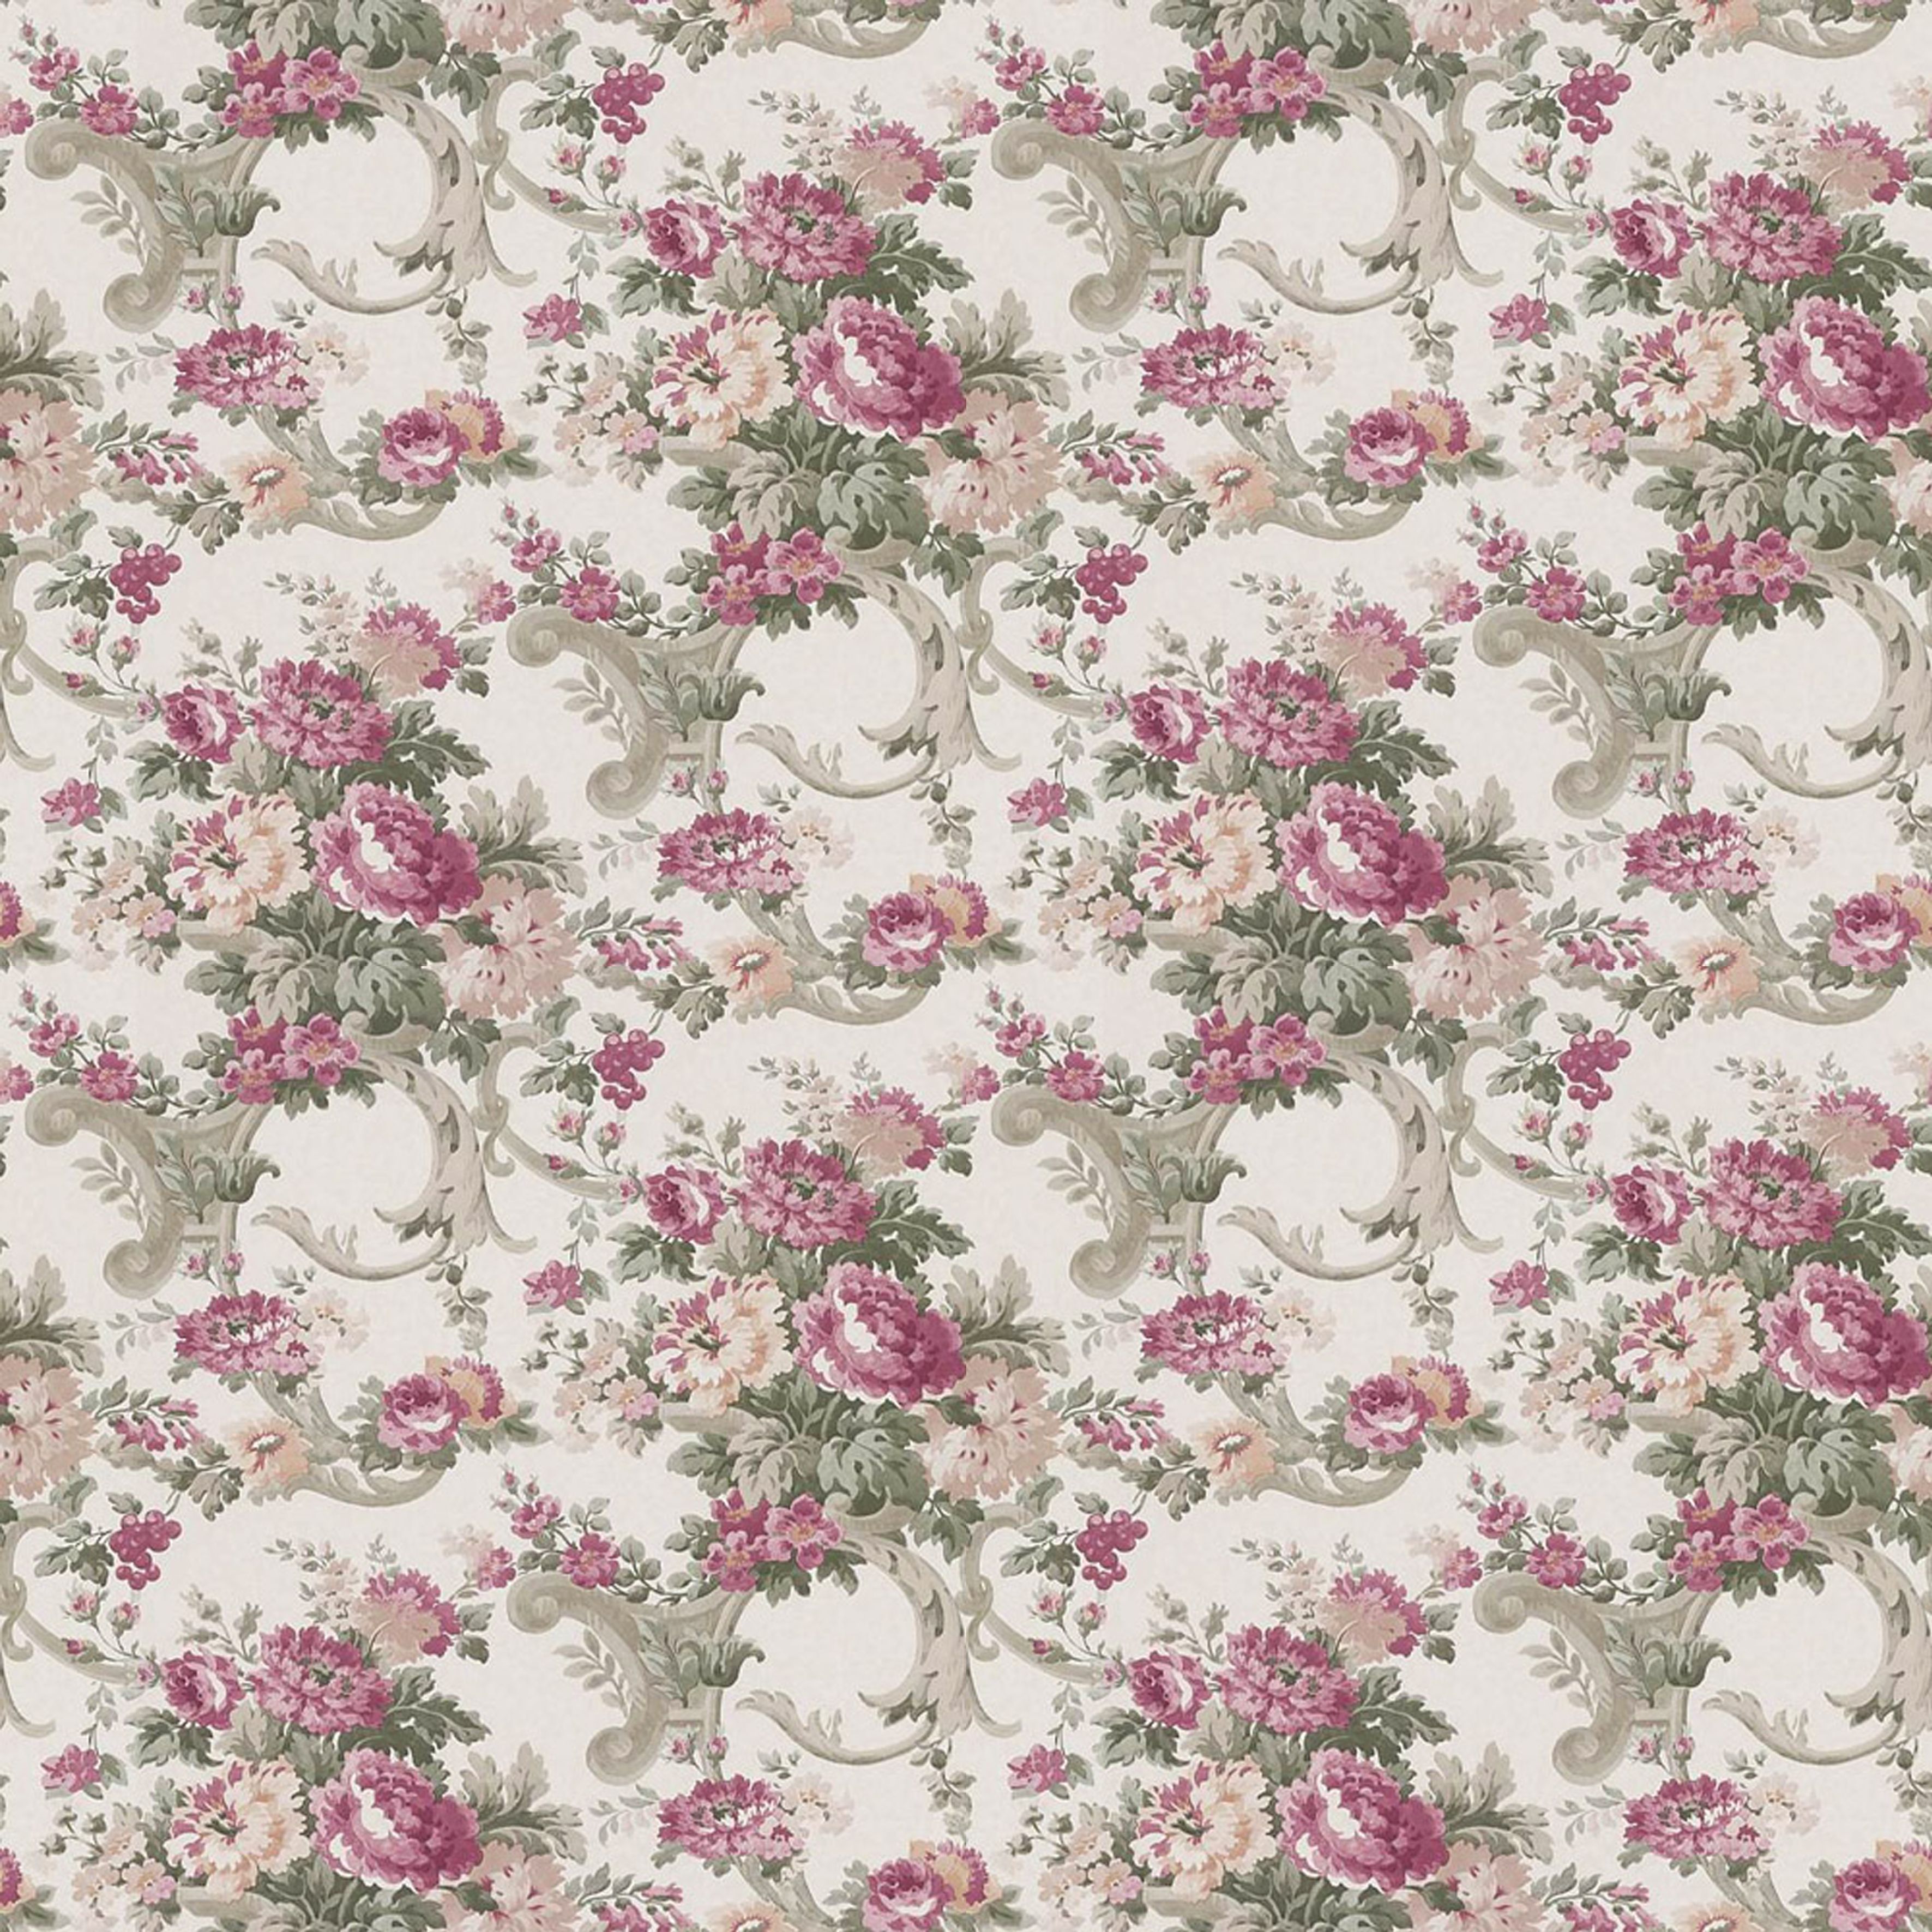 Floral background with peonies | Art ~Background ~ Texture ...